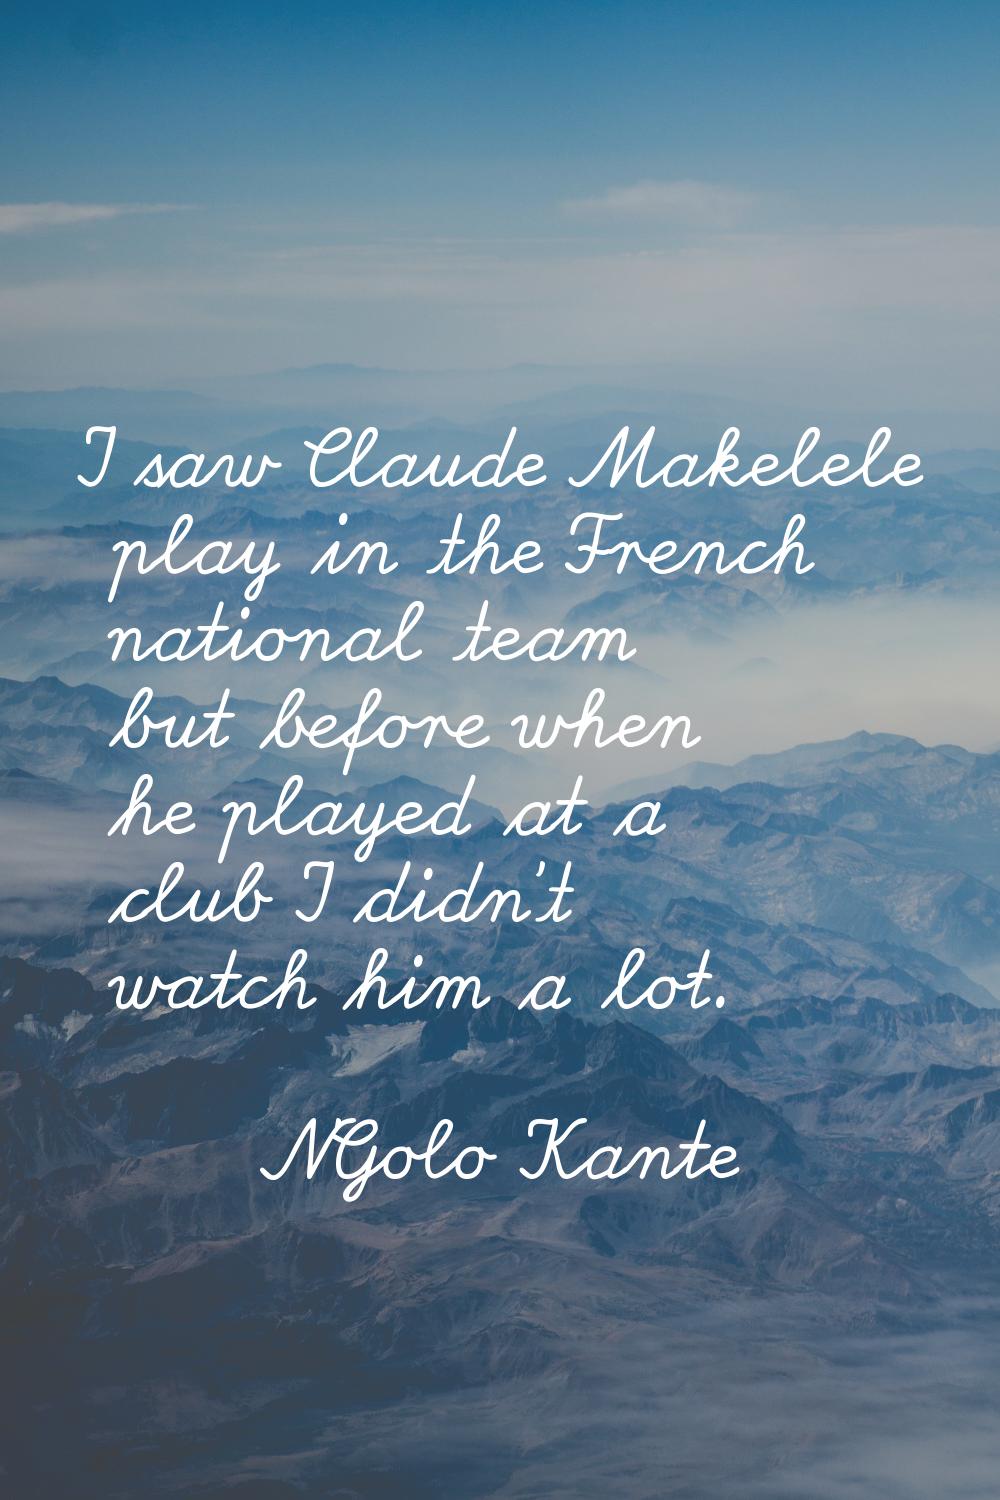 I saw Claude Makelele play in the French national team but before when he played at a club I didn't